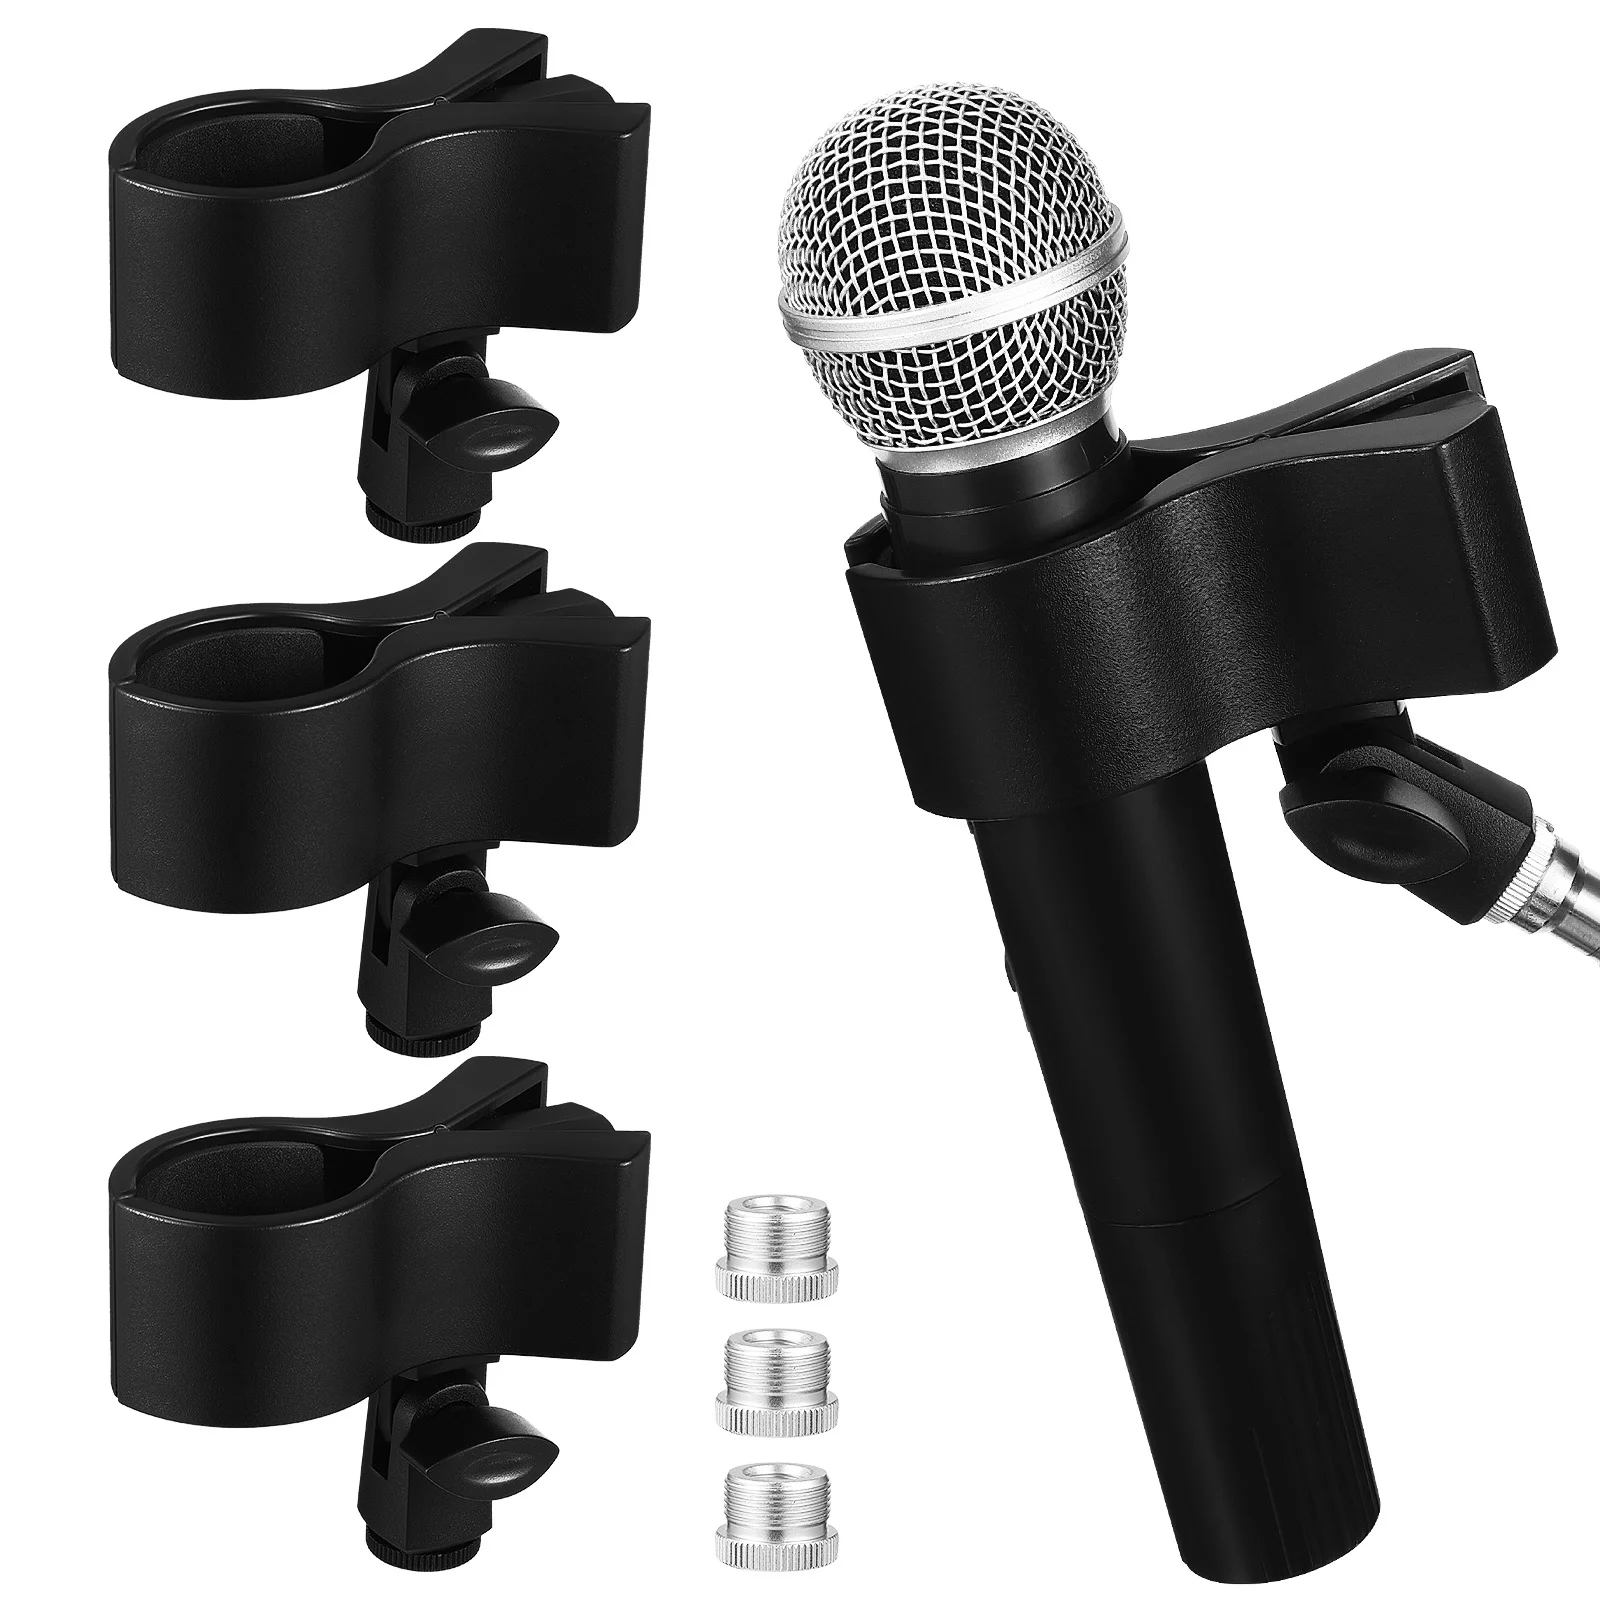 

3 Pcs Microphone Clip Stand Clips Fix Wireless Microphones Holder Clamps Speaking Stands